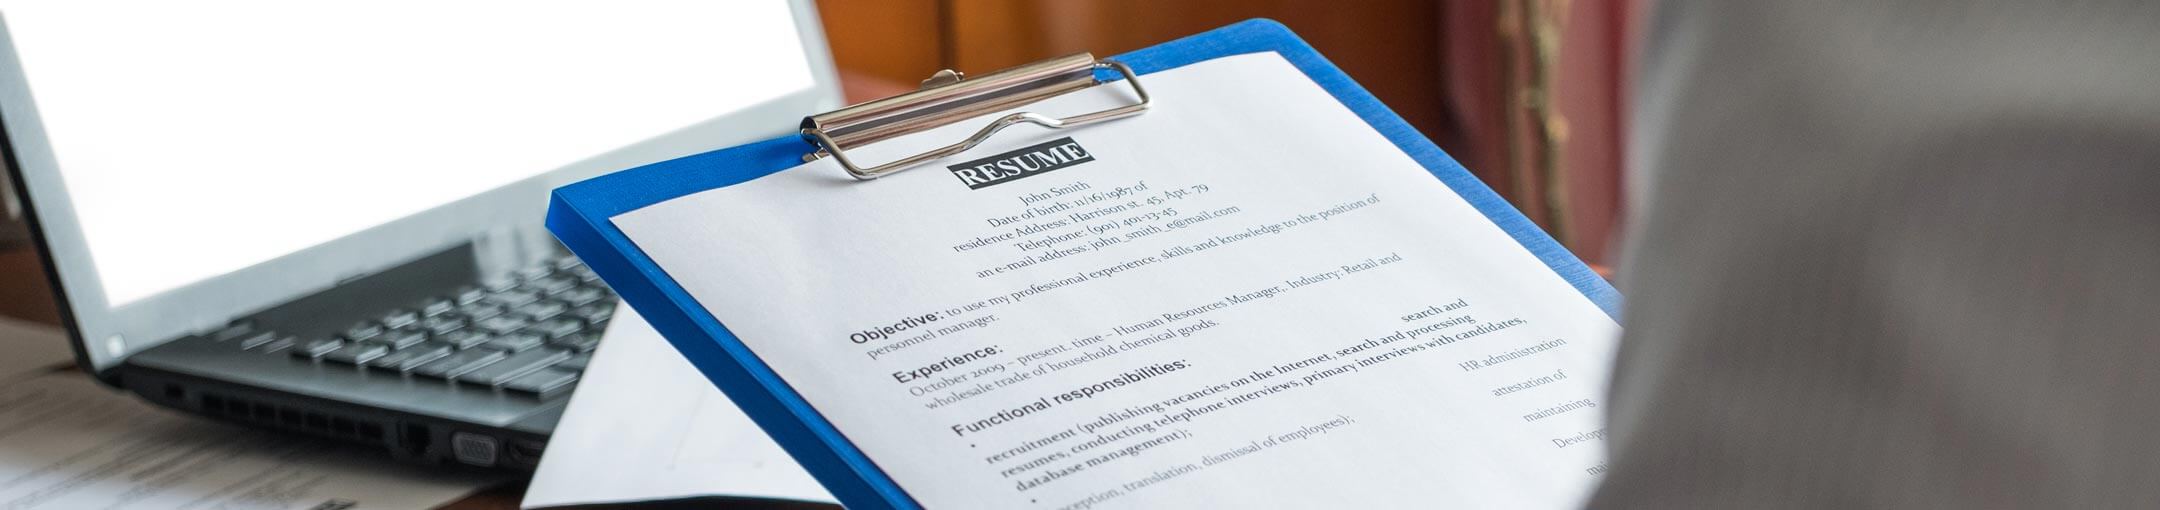 Person looking over resume on clipboard in front of laptop.